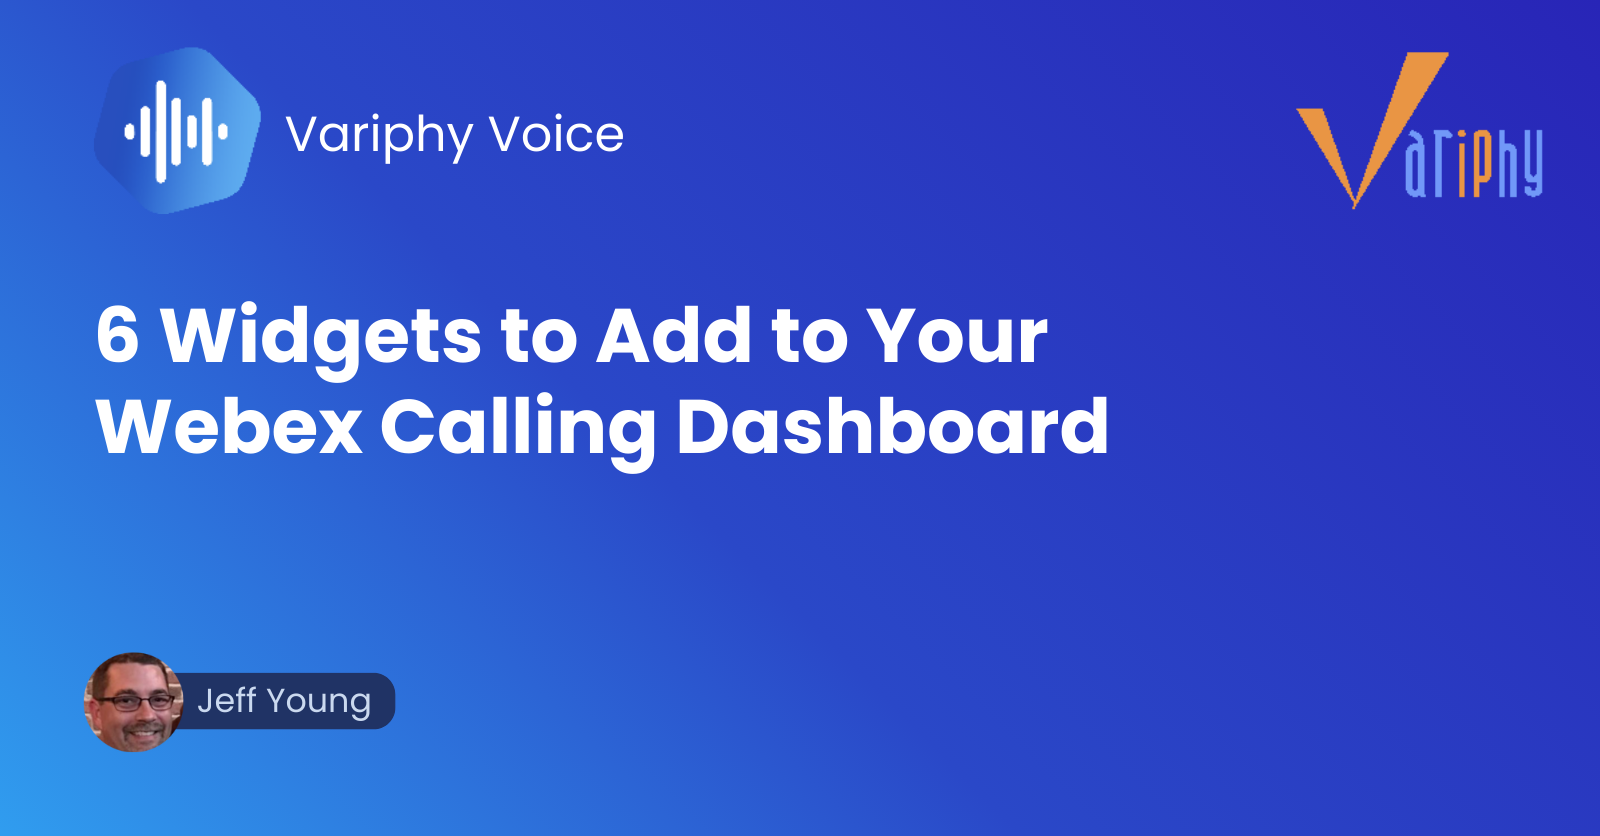 6 Widgets to Add to Your Webex Calling Dashboard